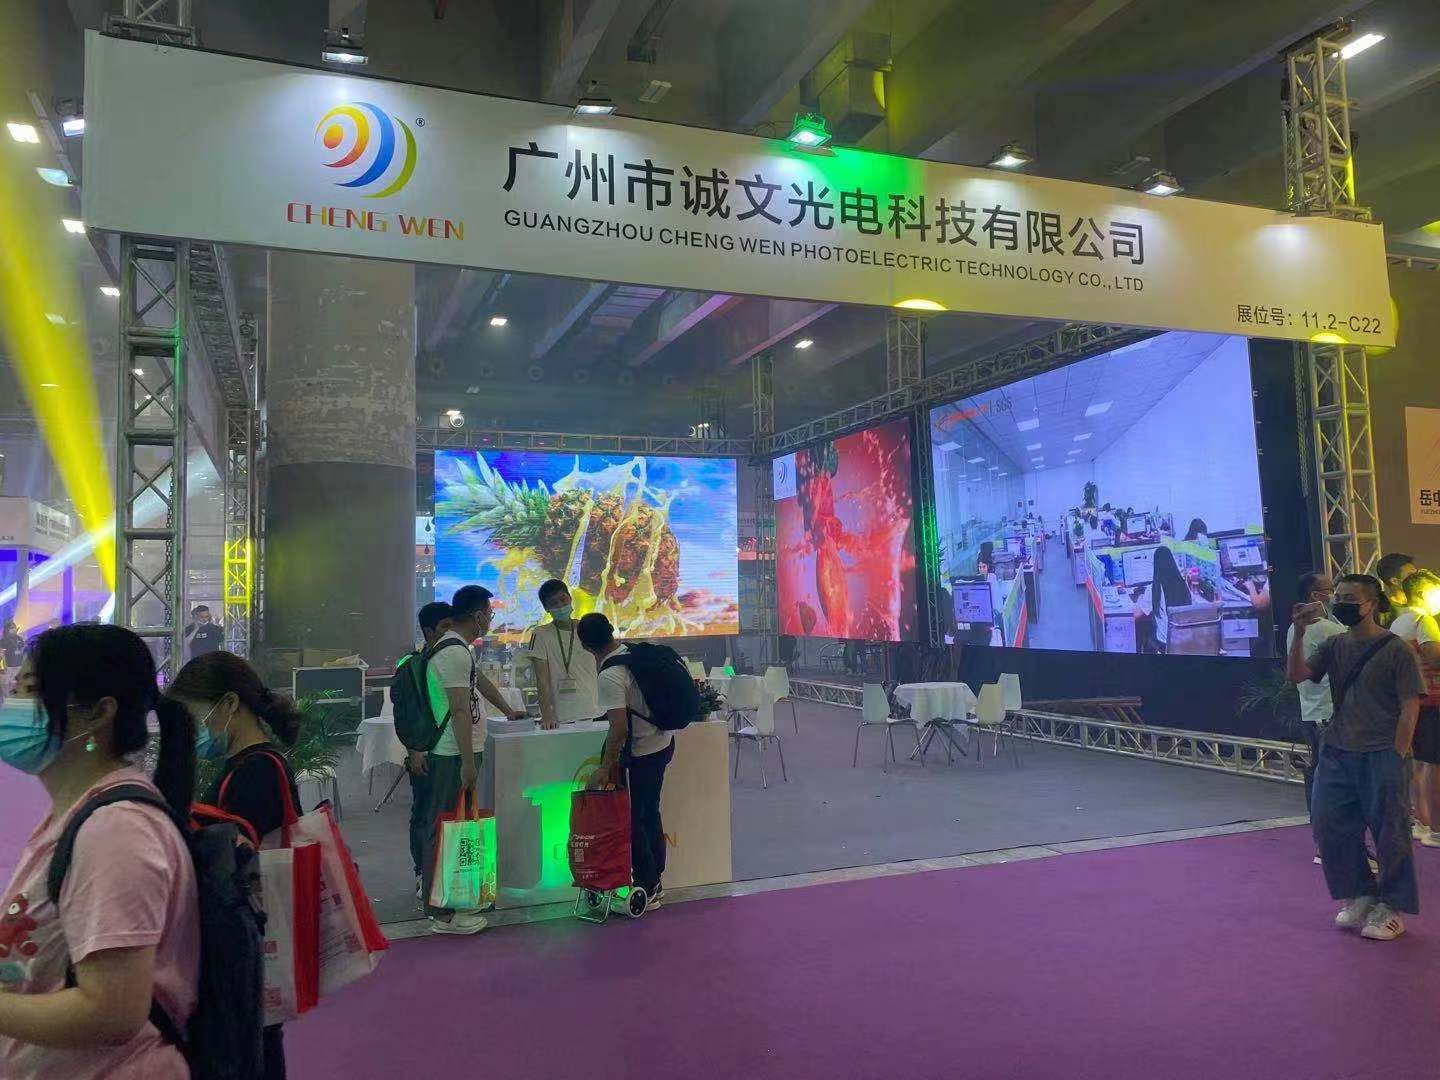 Exhibition led wall